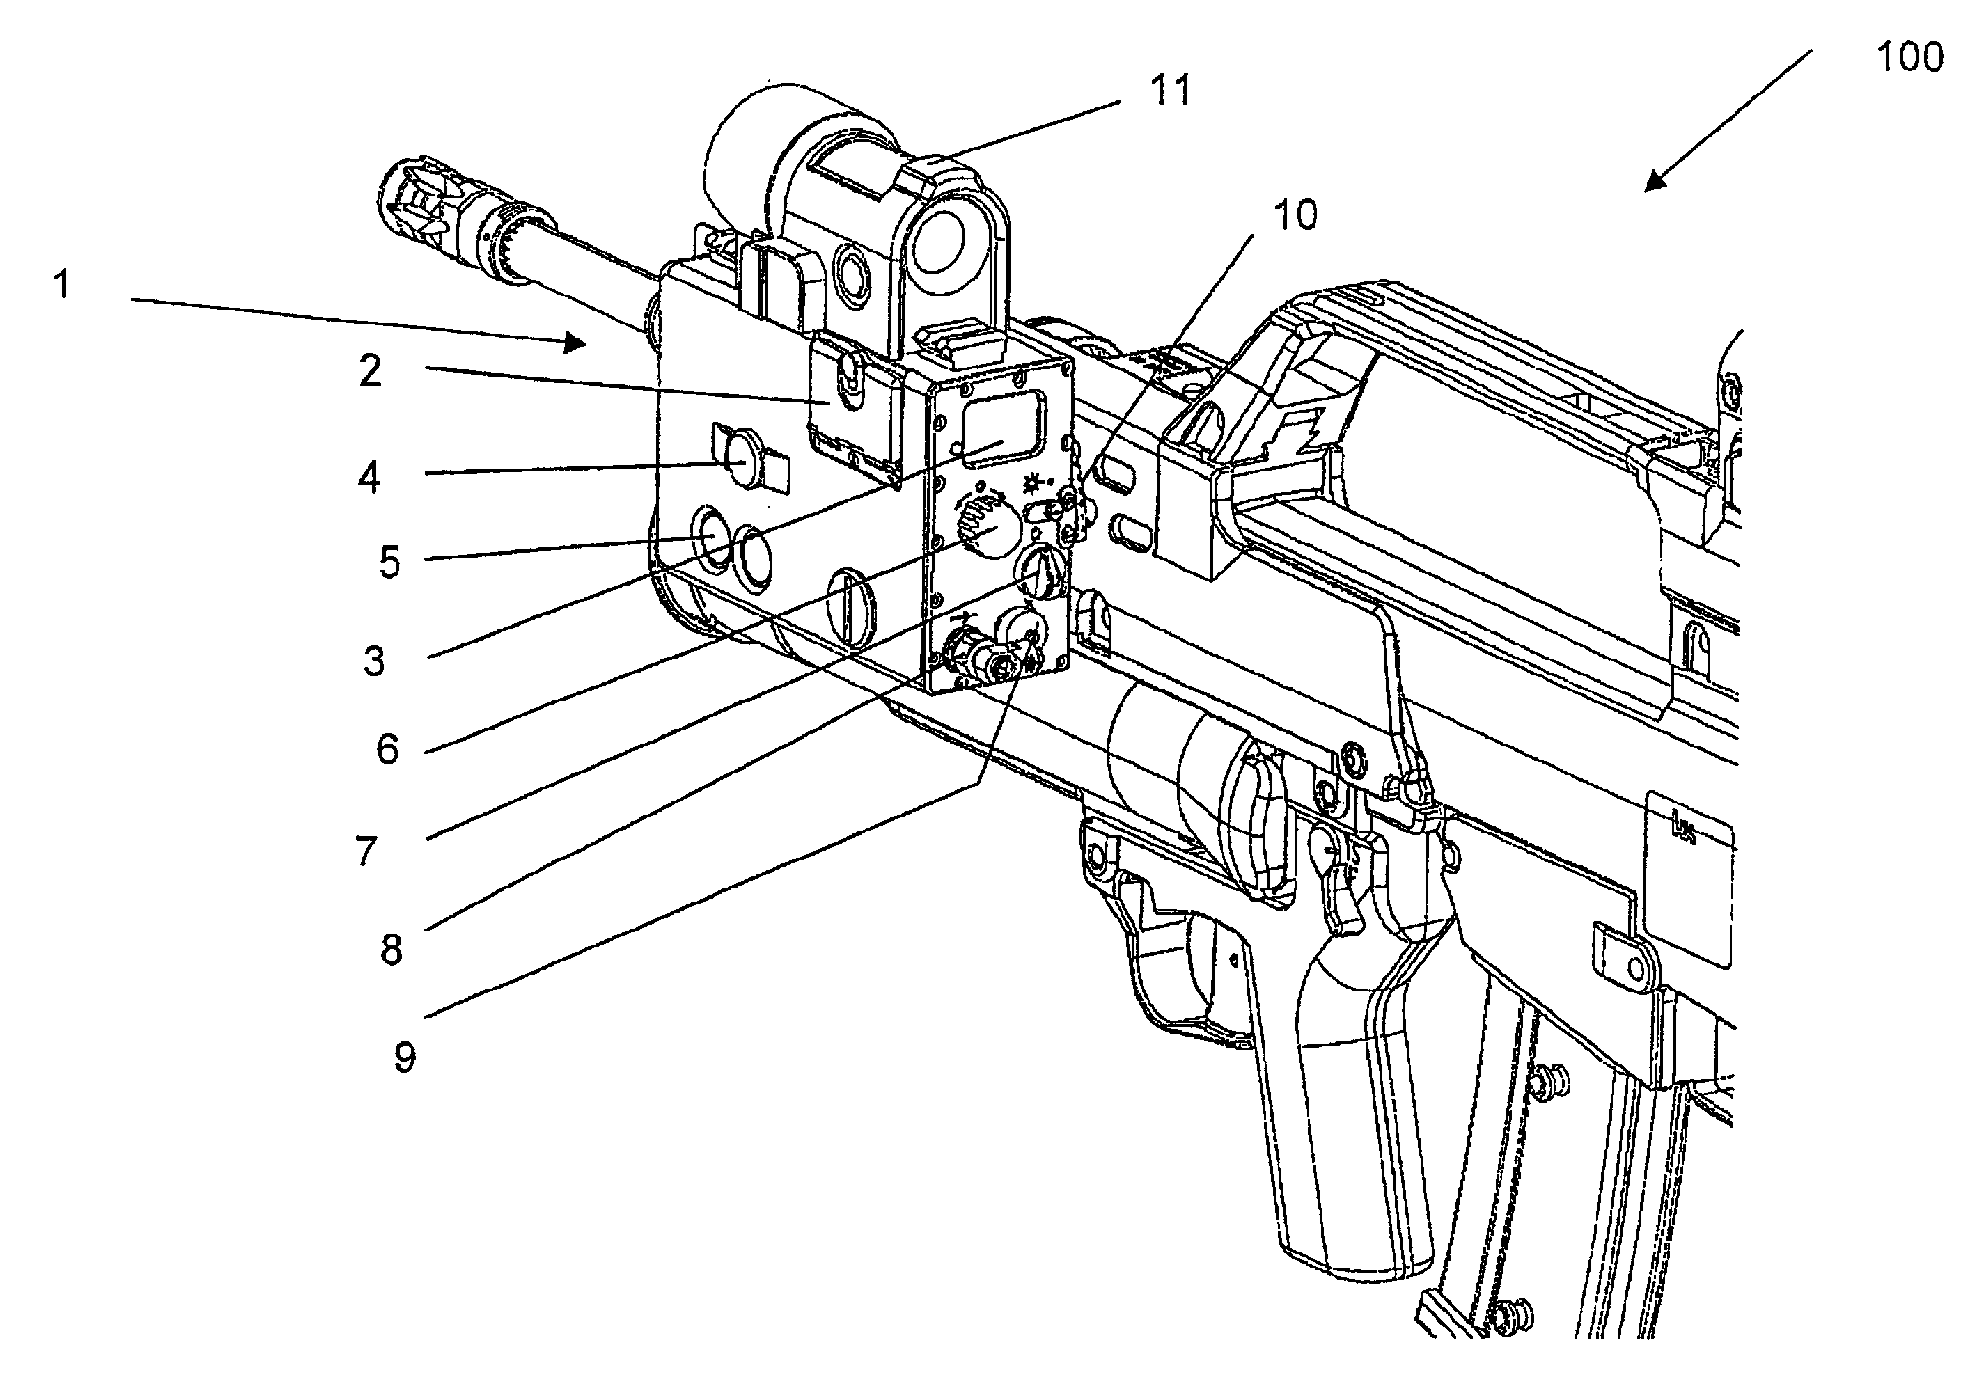 Fire guidance device for a hand fire weapon